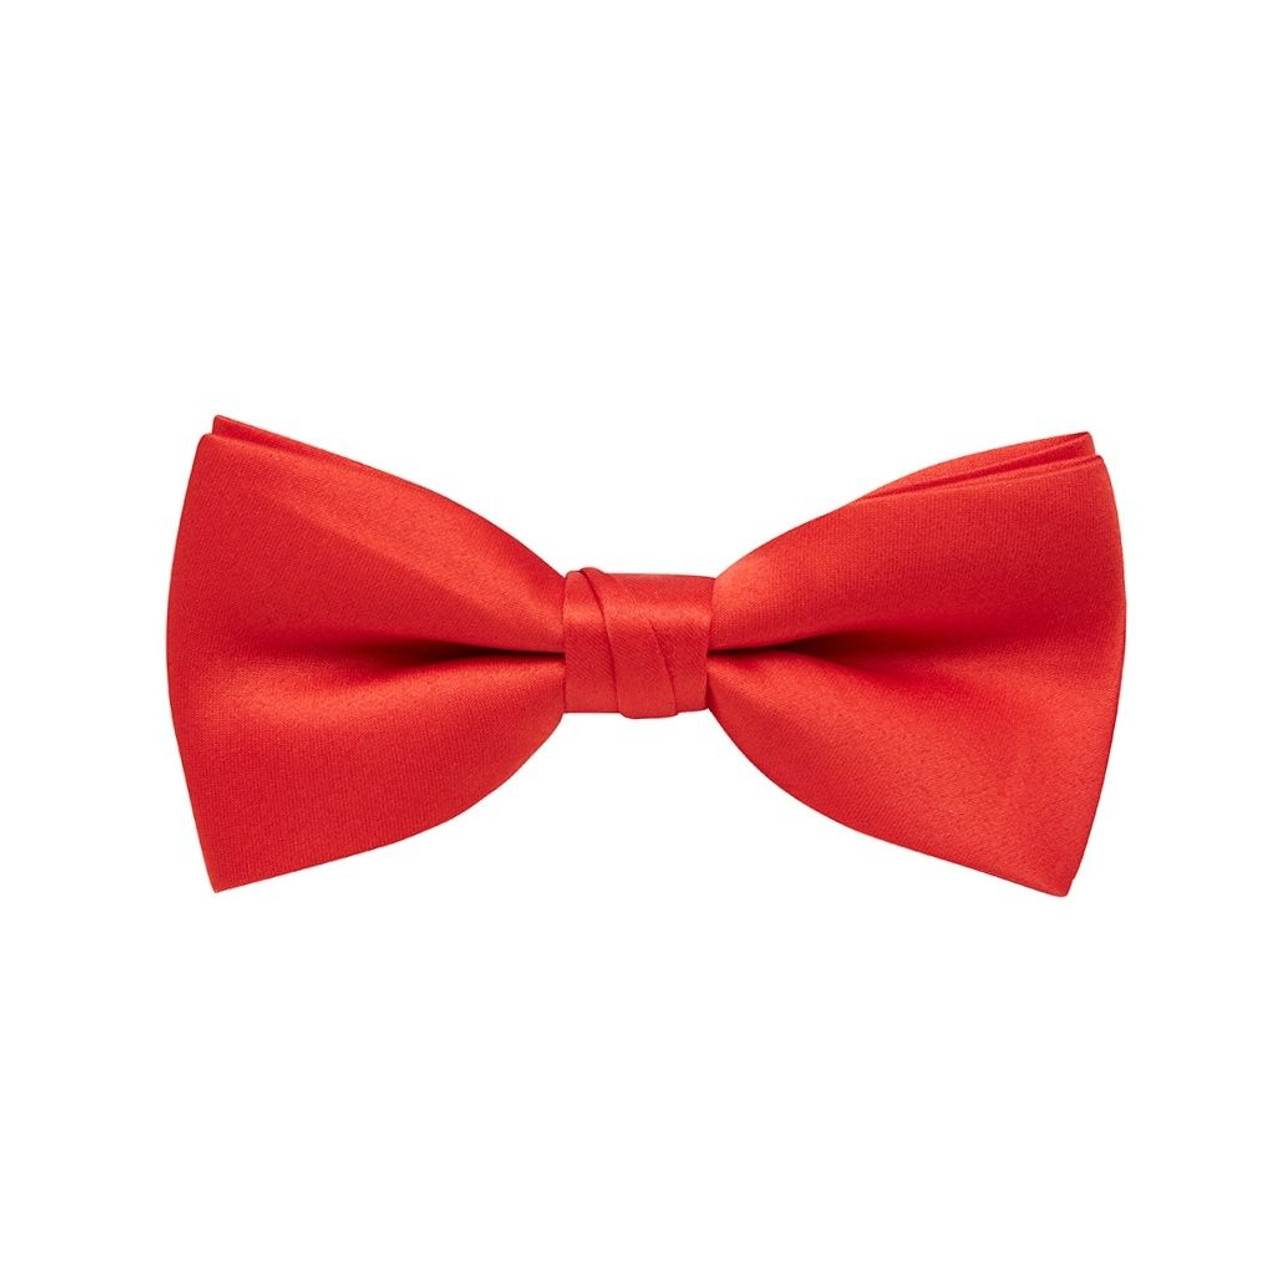 Red Plain Bow Tie from Buckle